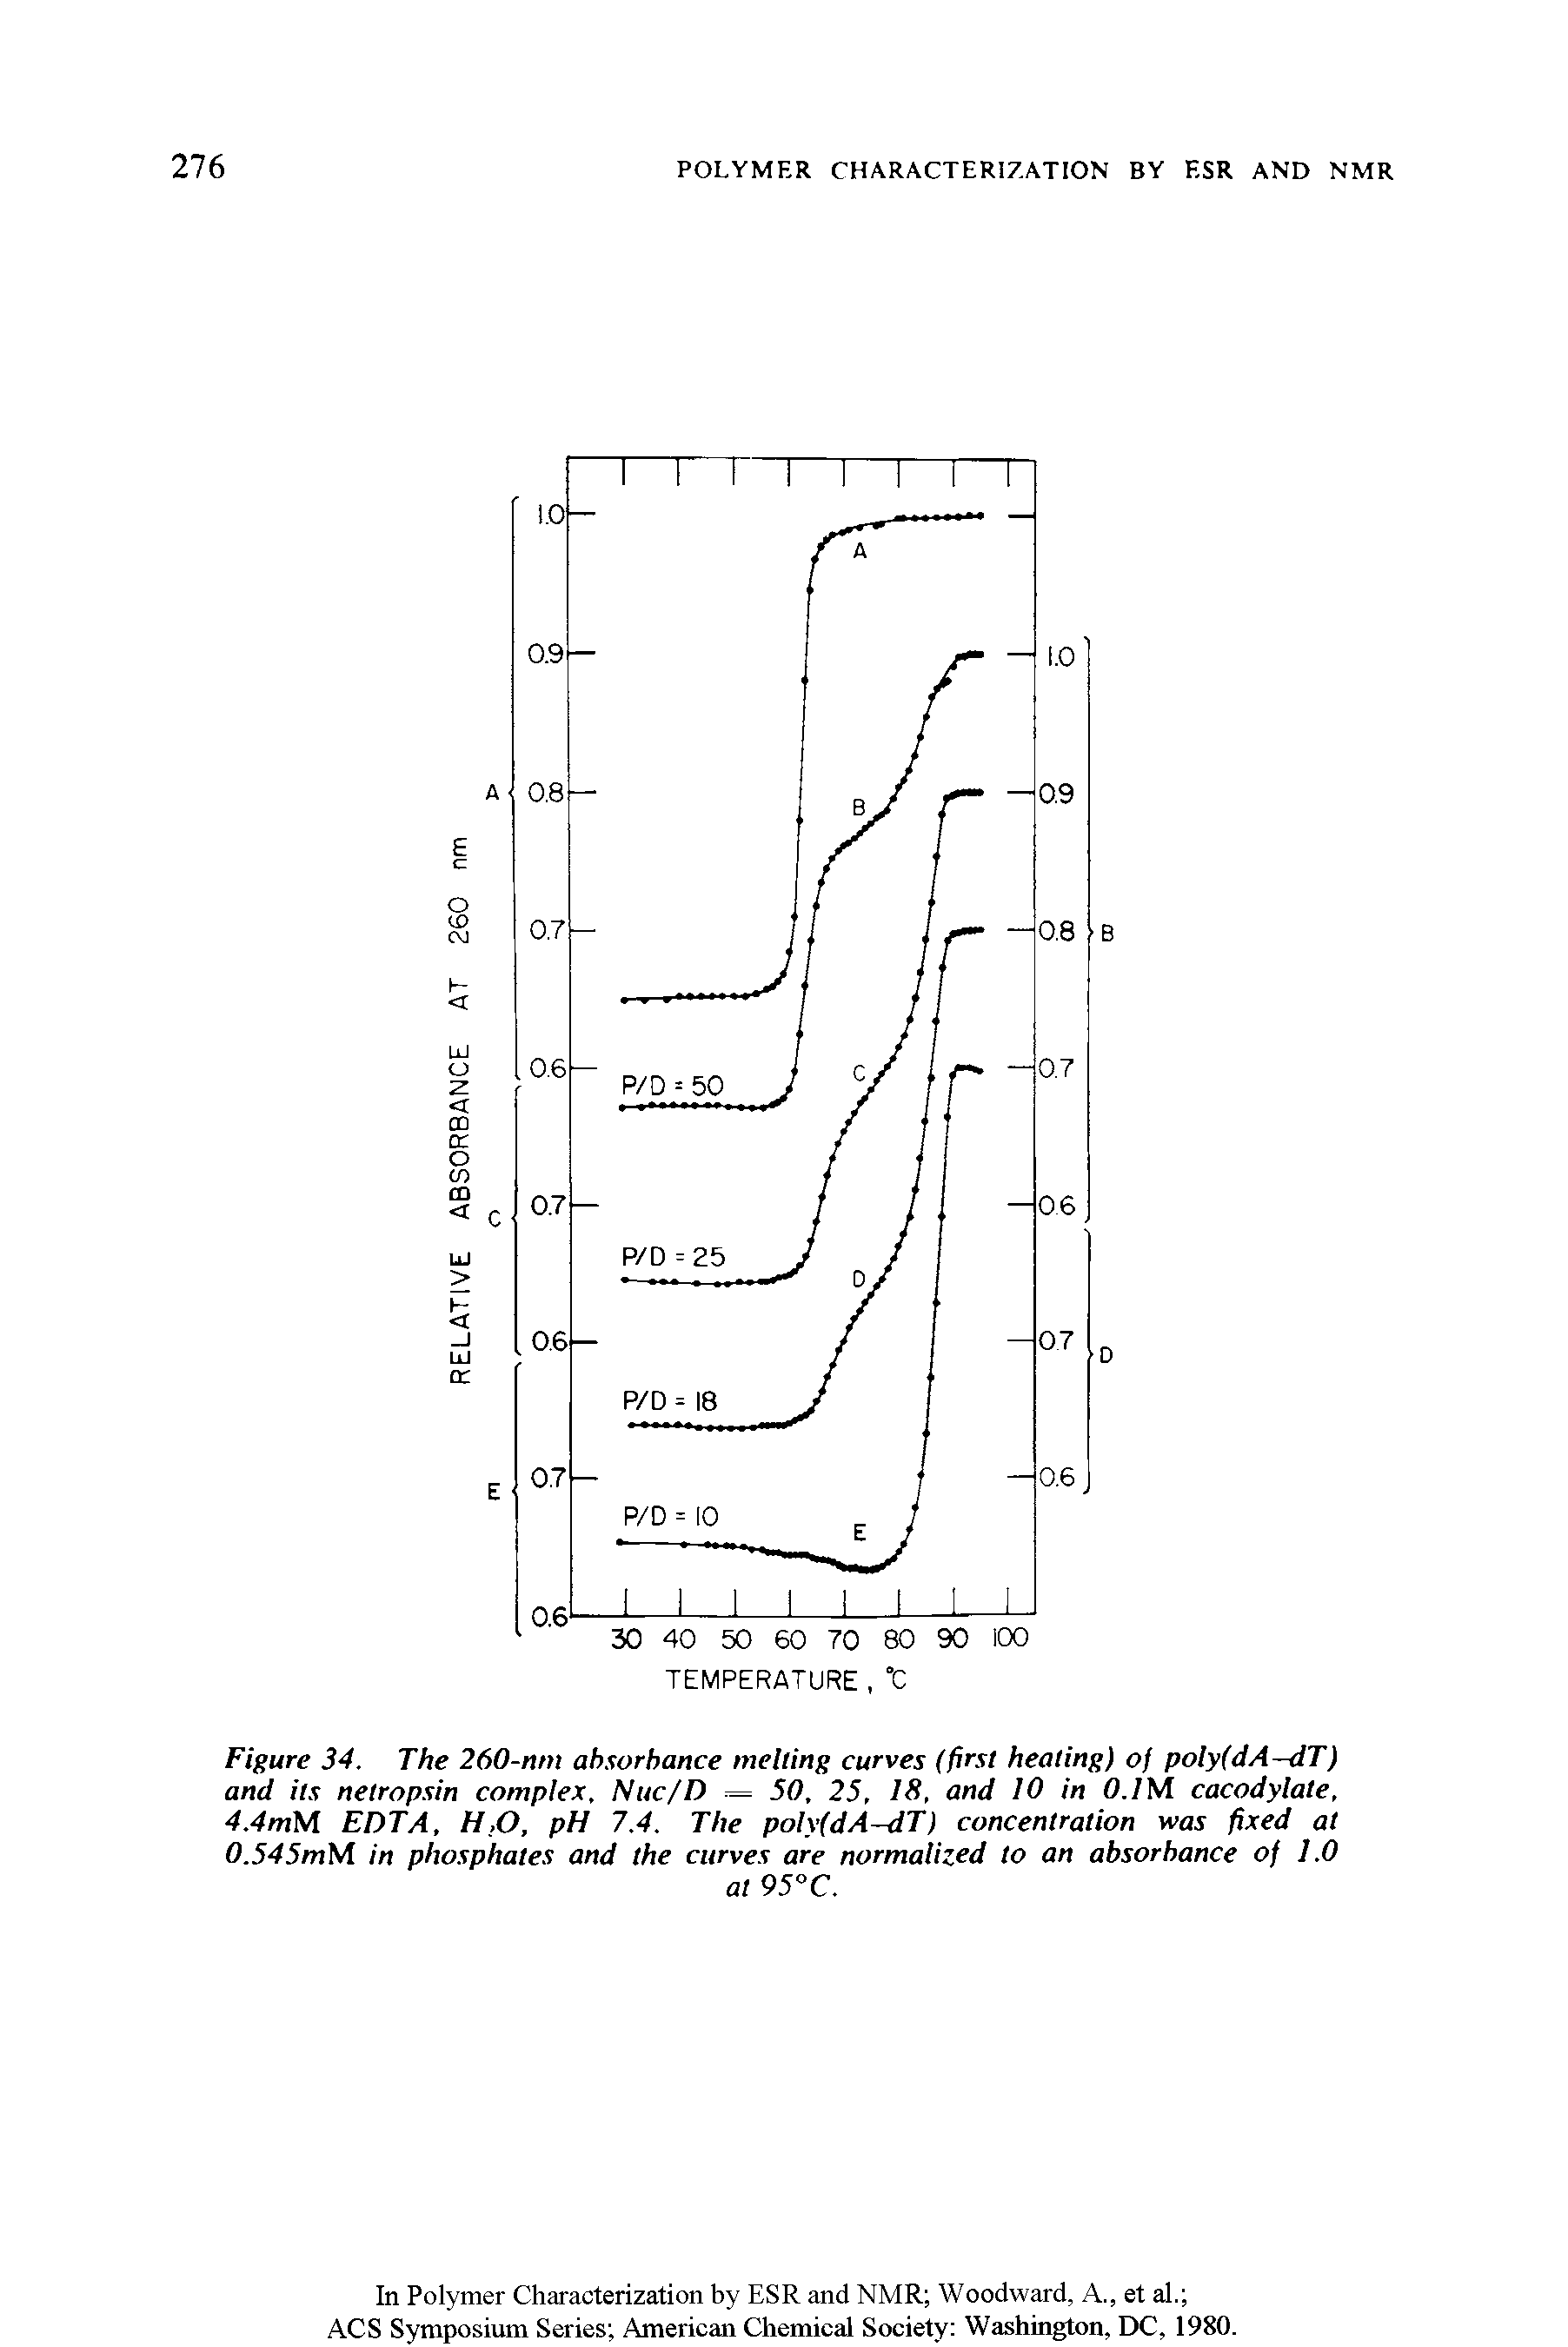 Figure 34. The 260-ntn absorbance melting curves (first heating) of poly(dA-dT) and its netropsin complex. Nttc/D — 50, 25, 18, and 10 in 0.1 M cacodylate, 4.4mM EDTA, H.O, pH 7.4. The polv(dA-dT) concentration was fixed at 0.545mM in phosphates and the curves are normalized to an absorbance of 1.0...